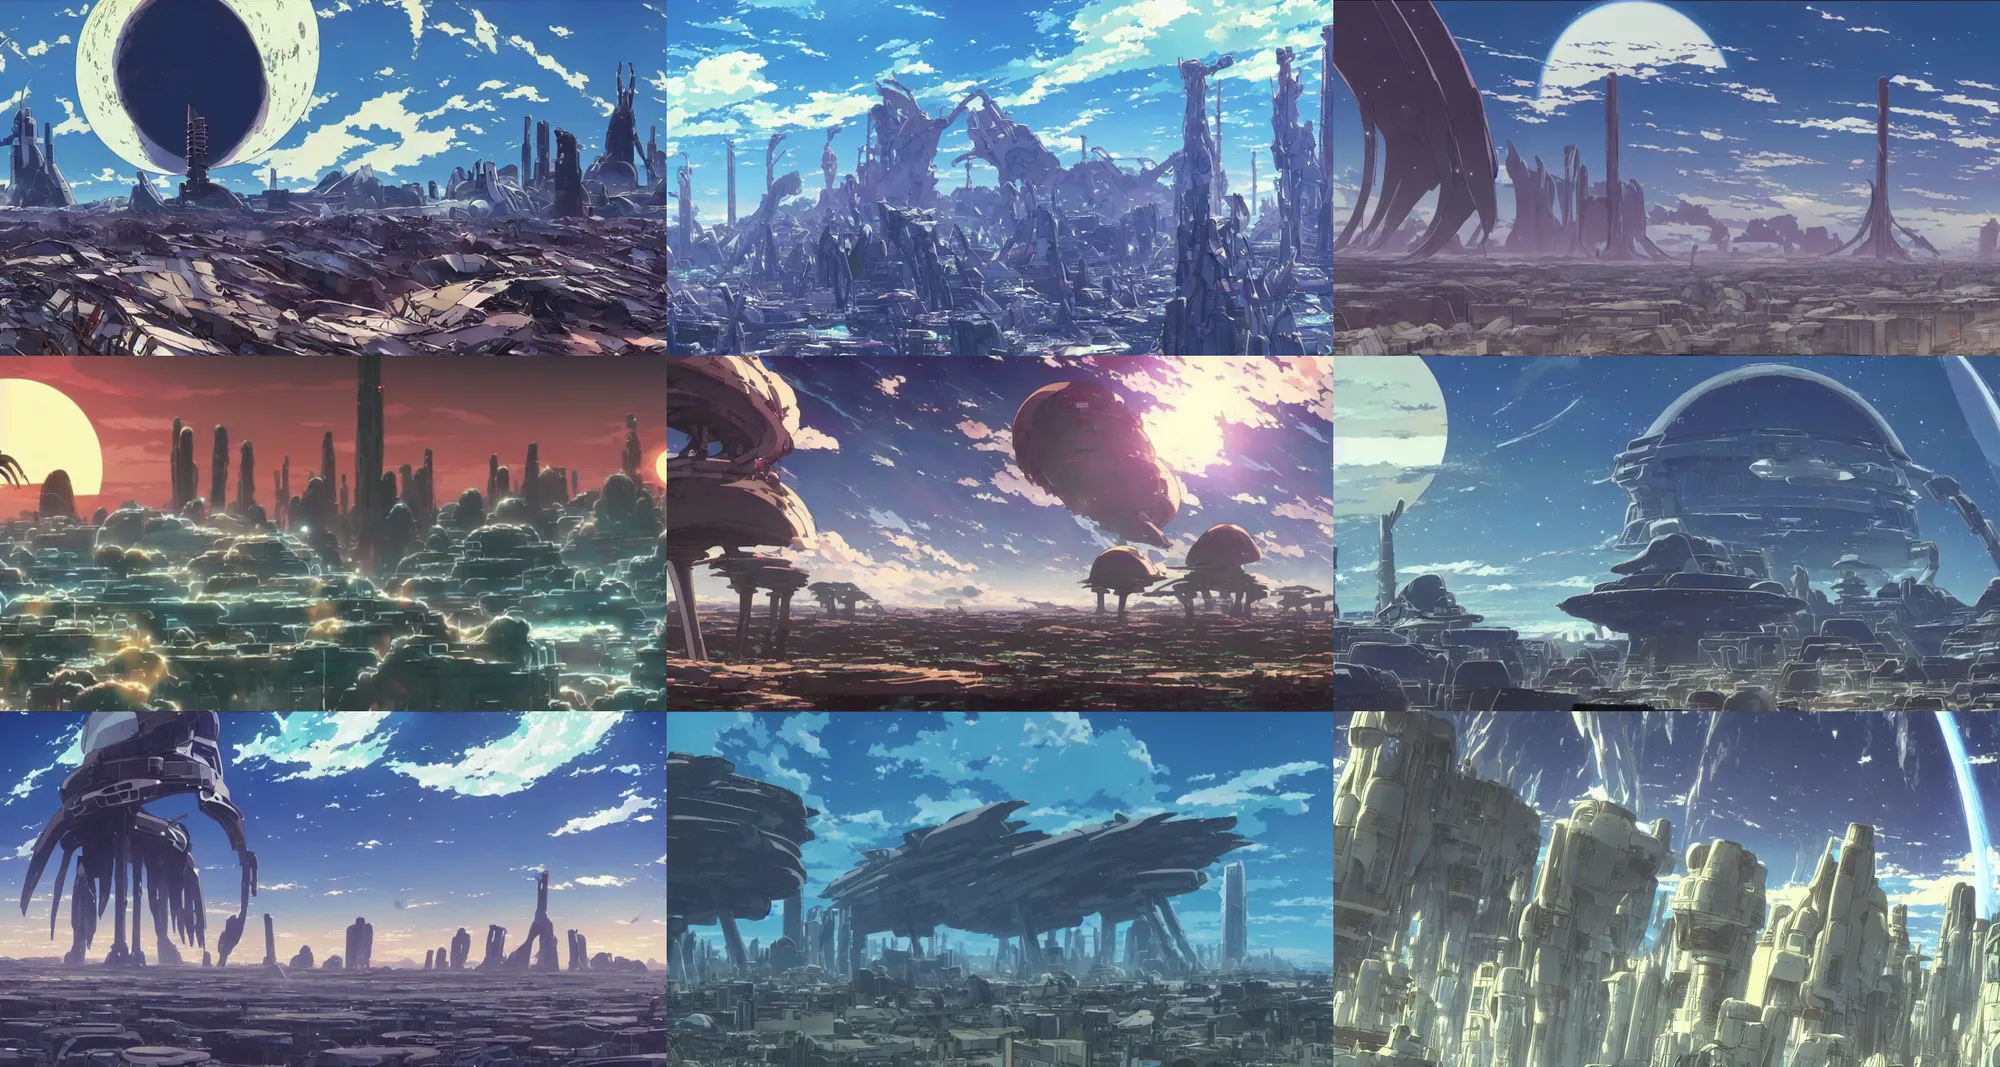 Prompt: screenshot from the science fiction anime film by makoto shinkai, towering ruins of alien megastructures, sandy desert alien planet, from the anime film by studio ghibli